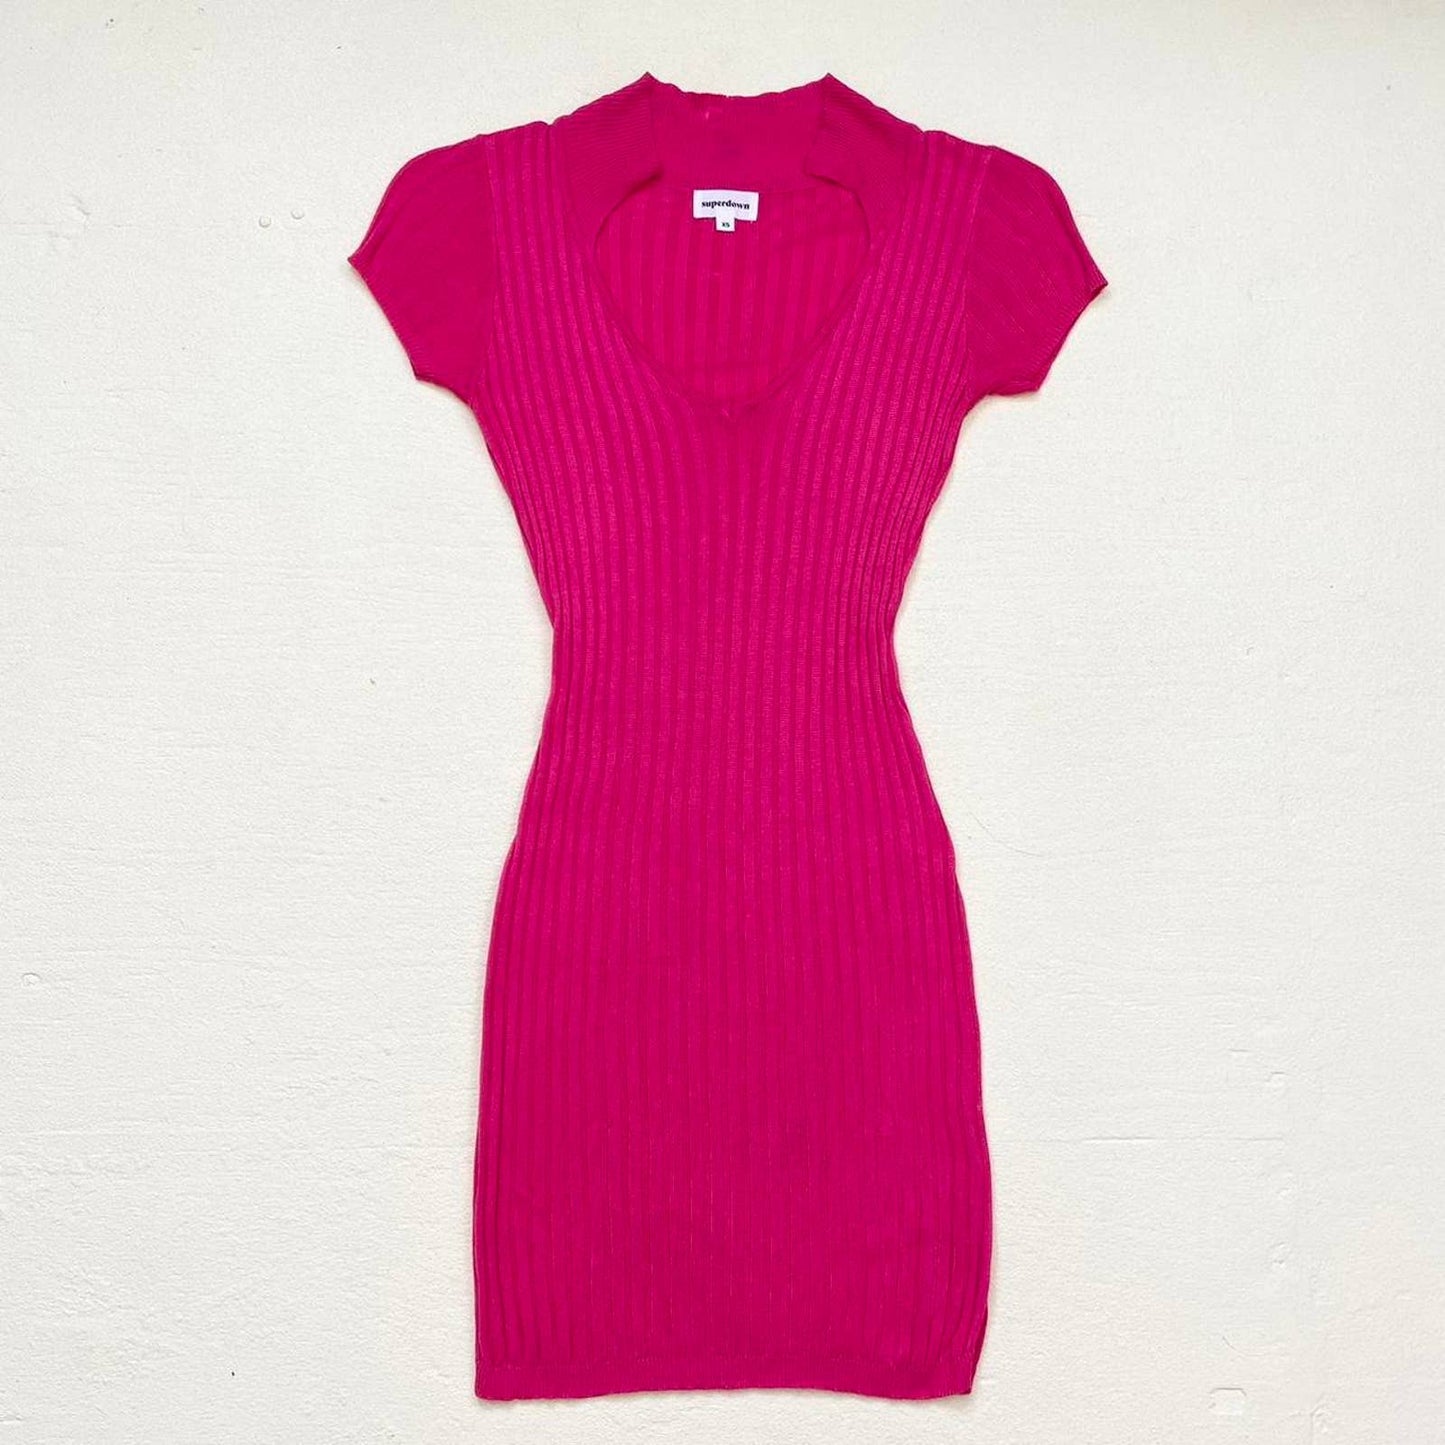 Secondhand Superdown Mariella Ribbed Mini Dress in Hot Pink, Size XS